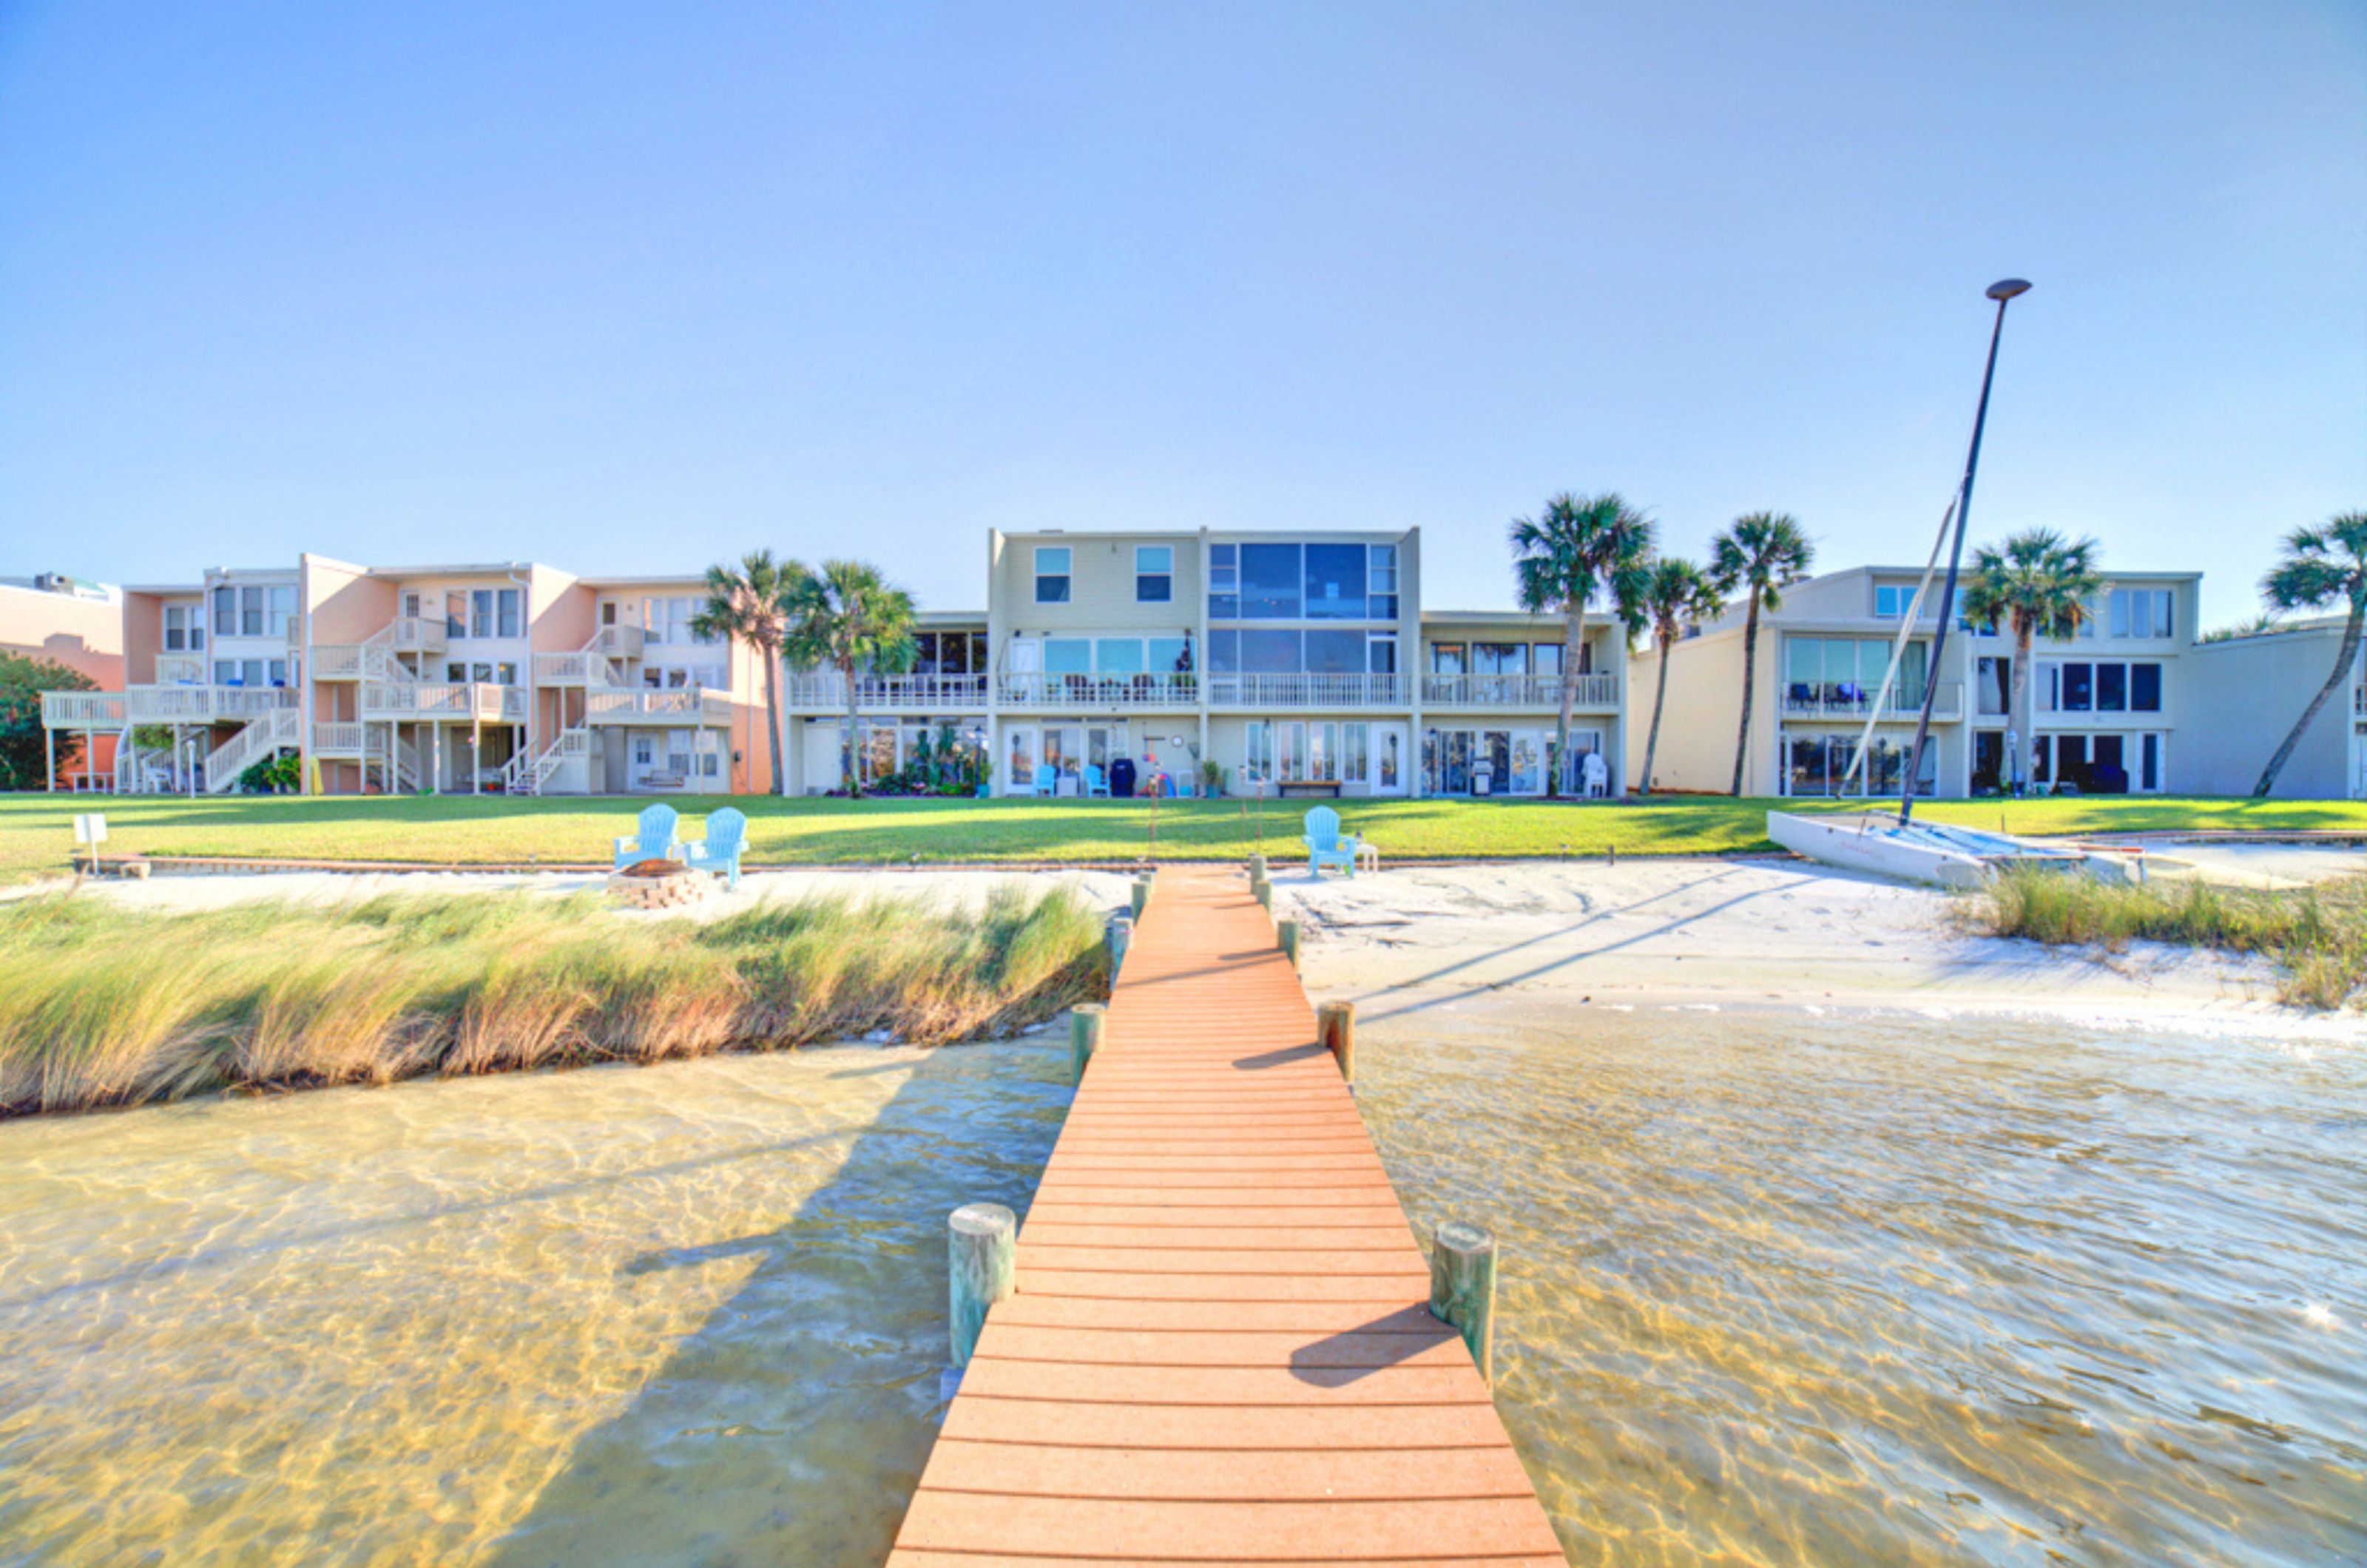 View from the bay of Treehouse Townhomes and the small pier leading towards the bay 